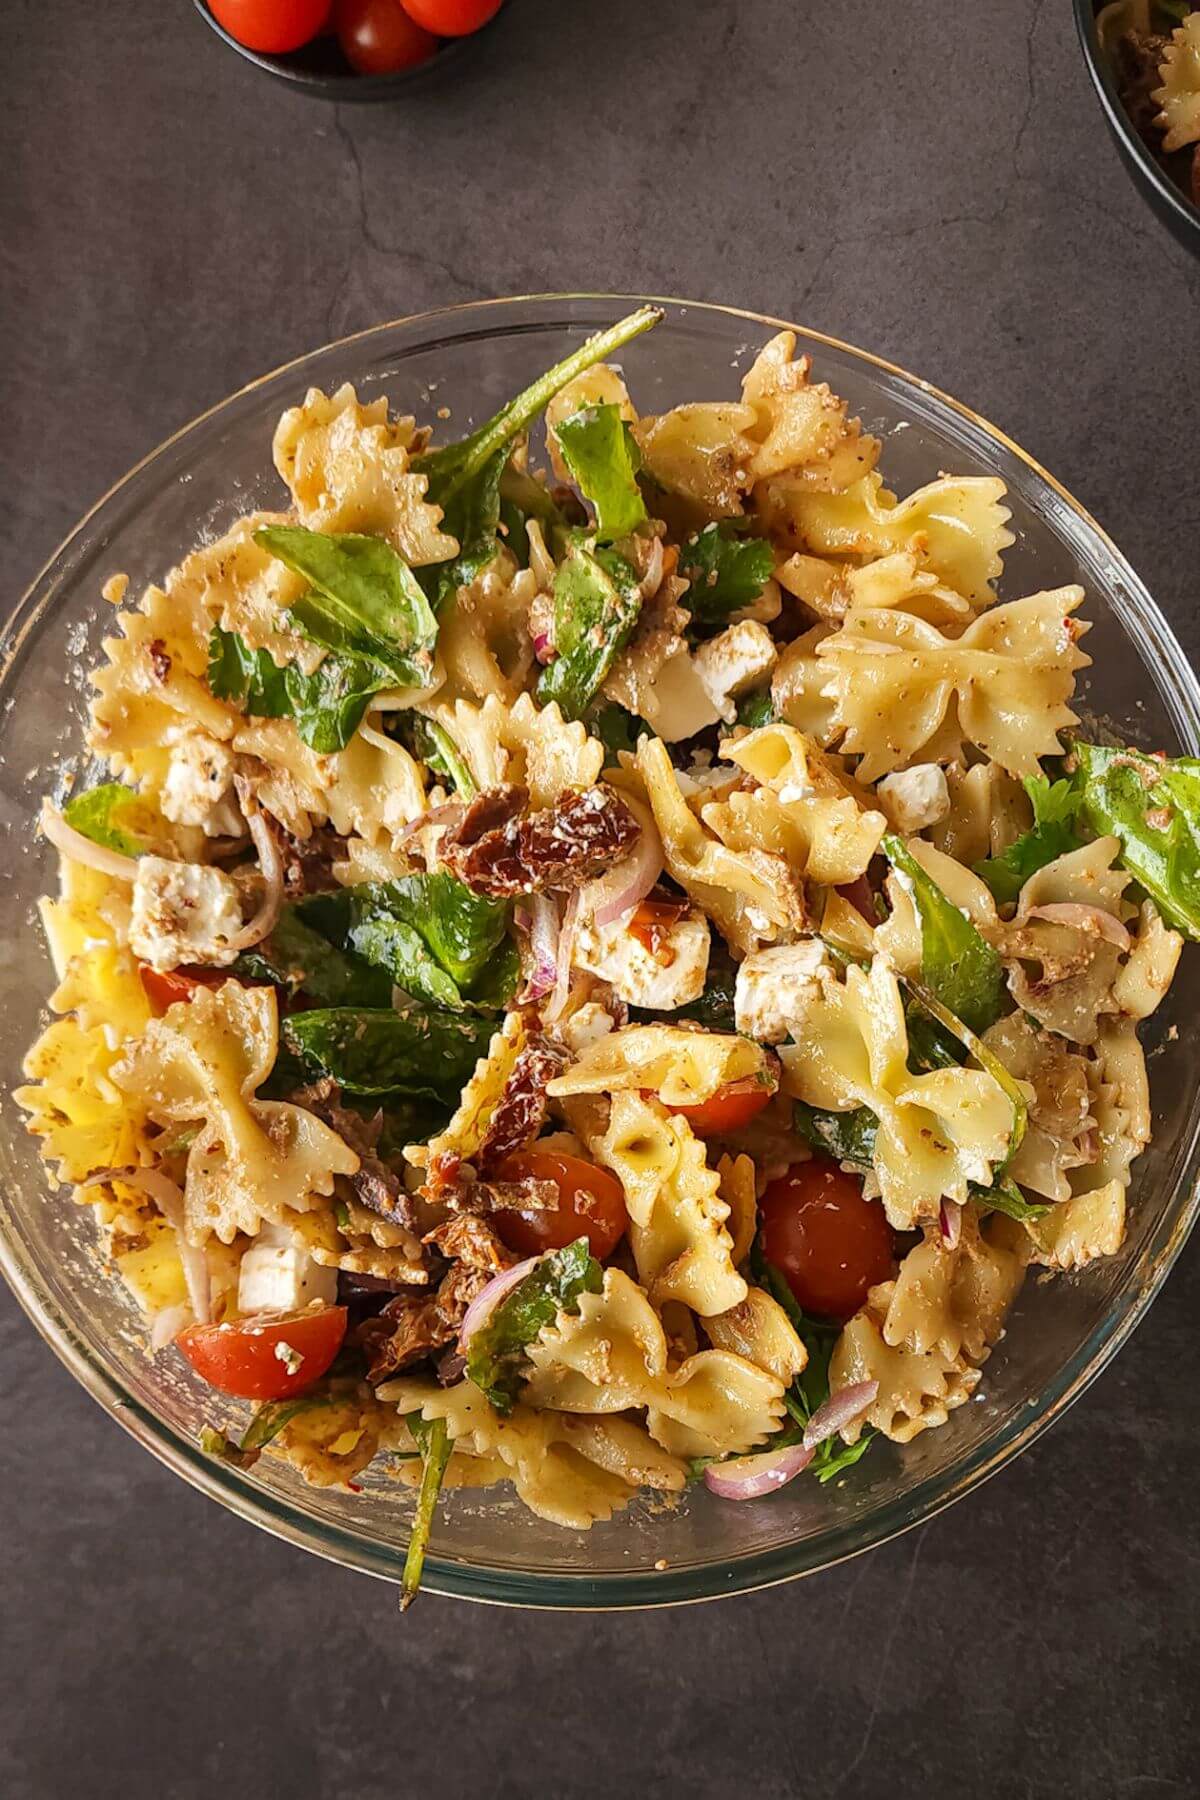 Greek pasta salad with sundried tomatoes and feta in a bowl.